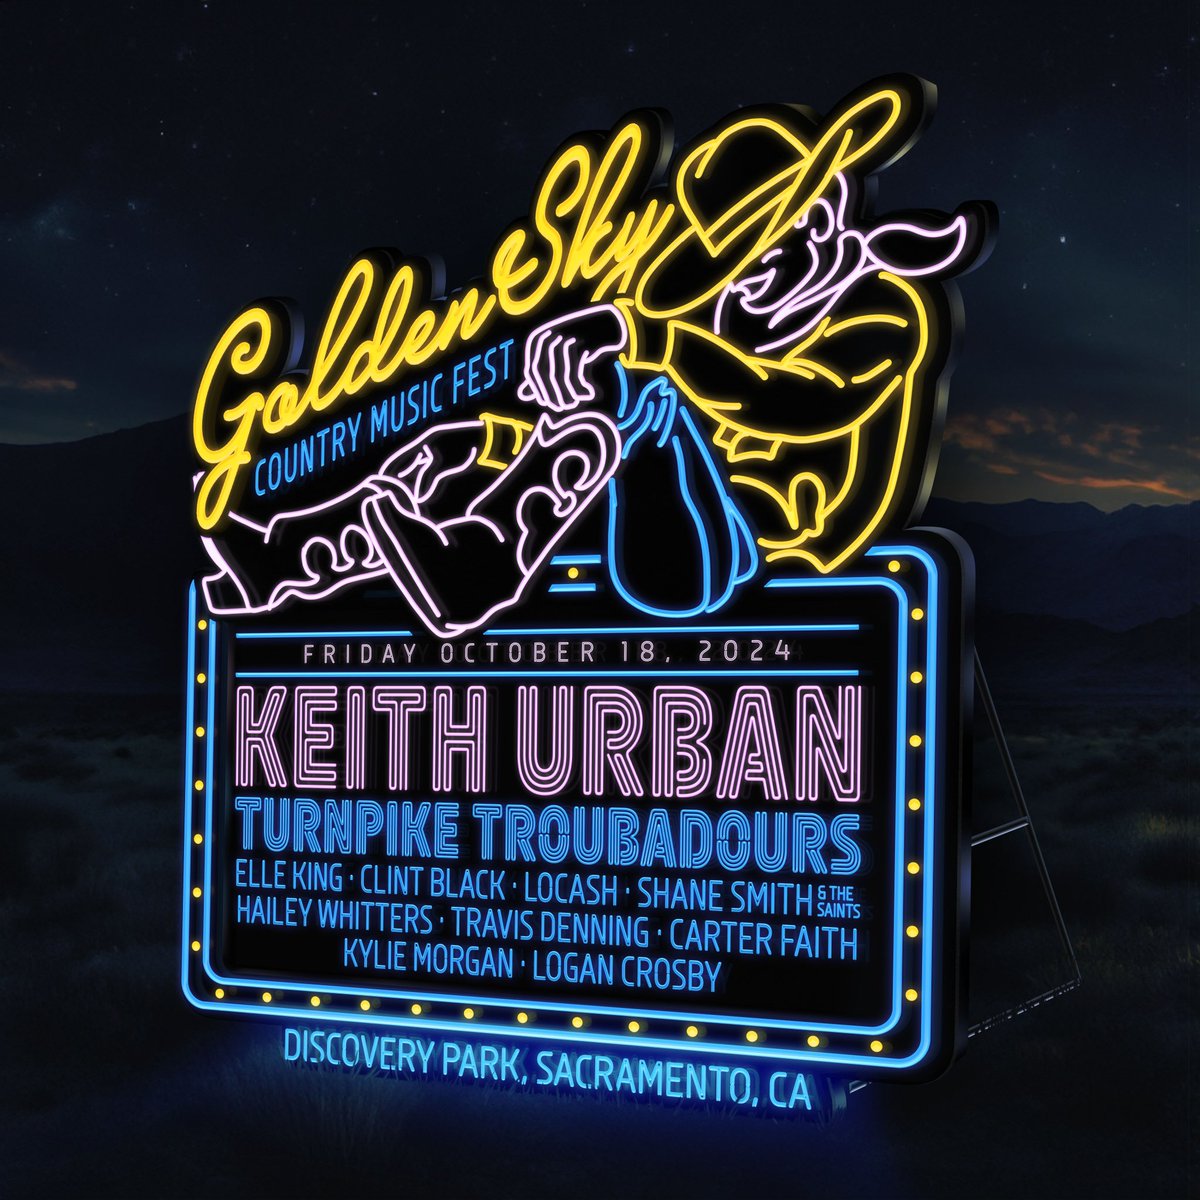 Get ready for a Friday at GoldenSky like no other! We’re bringing a stellar lineup straight to you with the likes of @KeithUrban, @TpTroubadours, @ElleKingMusic, @Clint_Black, @LOCASHmusic, and a whole lineup of stars set to light up the stage. Which act are you counting the…